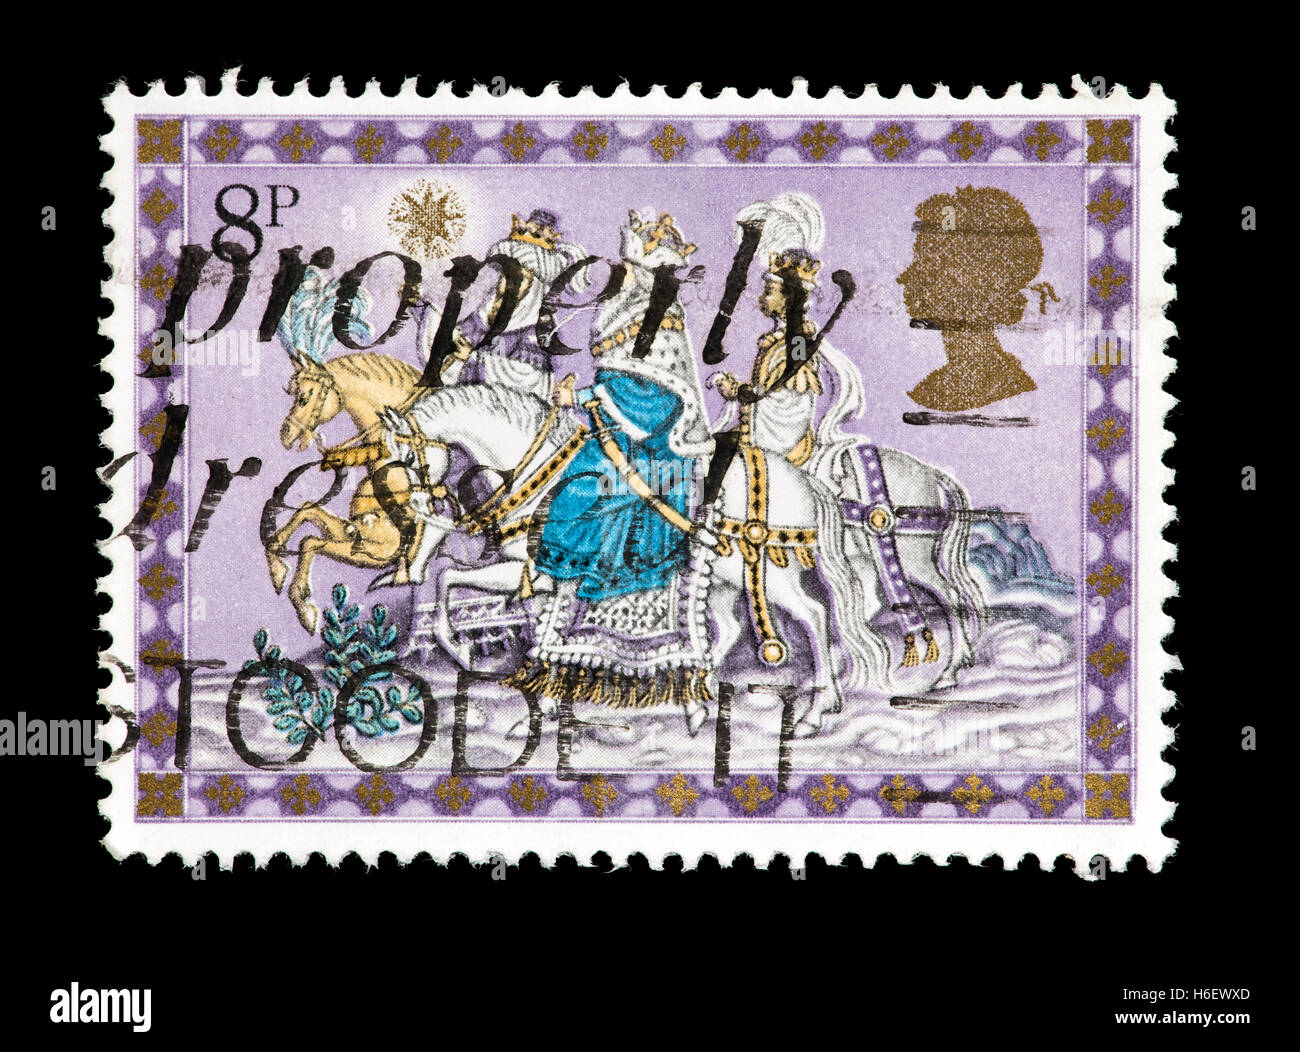 Postage stamp from Great Britain depicting the three kings following star, Christmas issue. Stock Photo